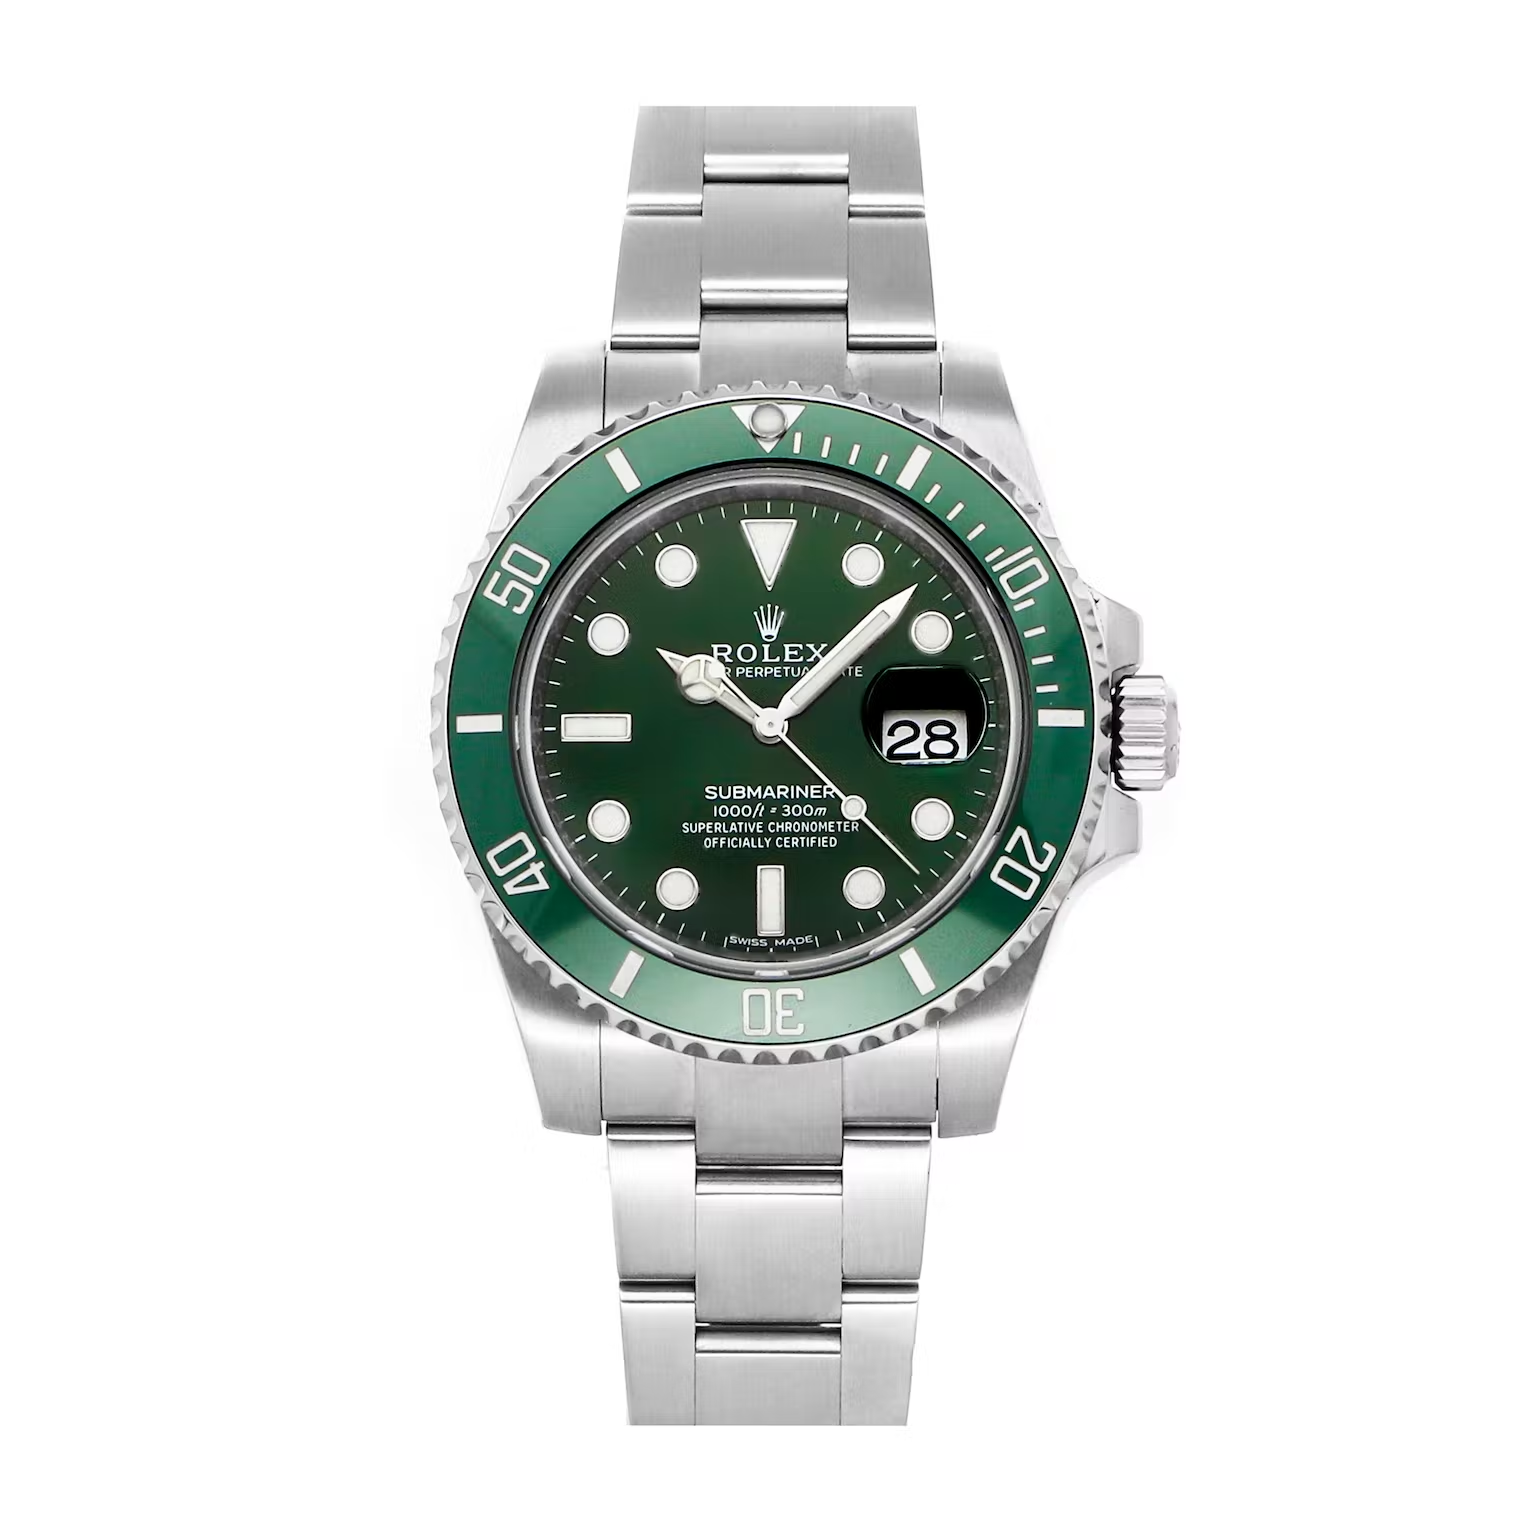 【UAE National Day warm-up❤ONLY 550 】ROLEX SUBMARINER DATE OYSTER 41 MM OYSTERTEEL M126610LV-0002